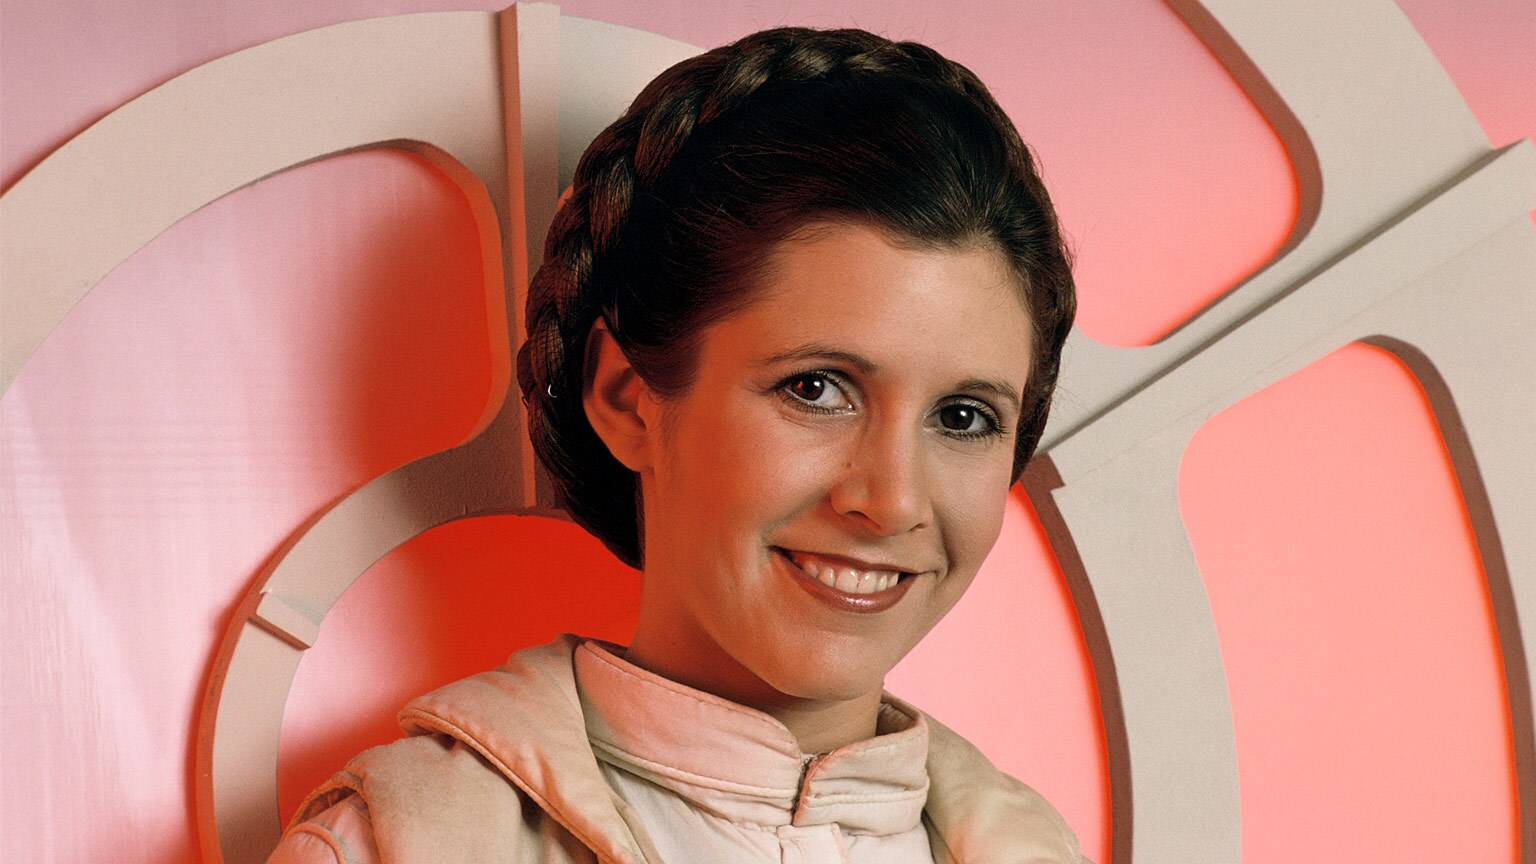 Quiz: What Percent Leia Are You?